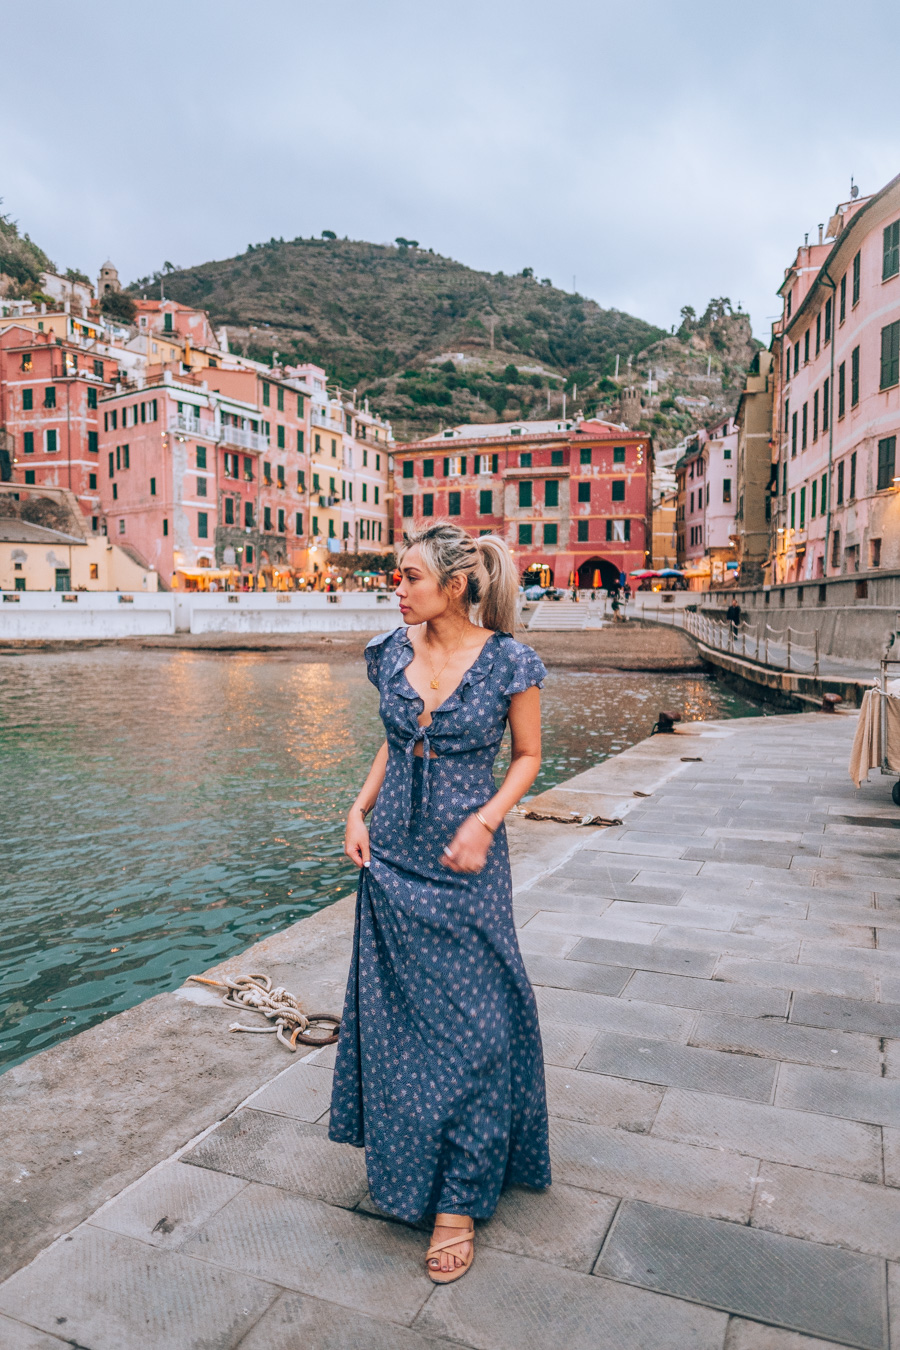 Most Instagrammable Spots in Cinque Terre – cherrielynn